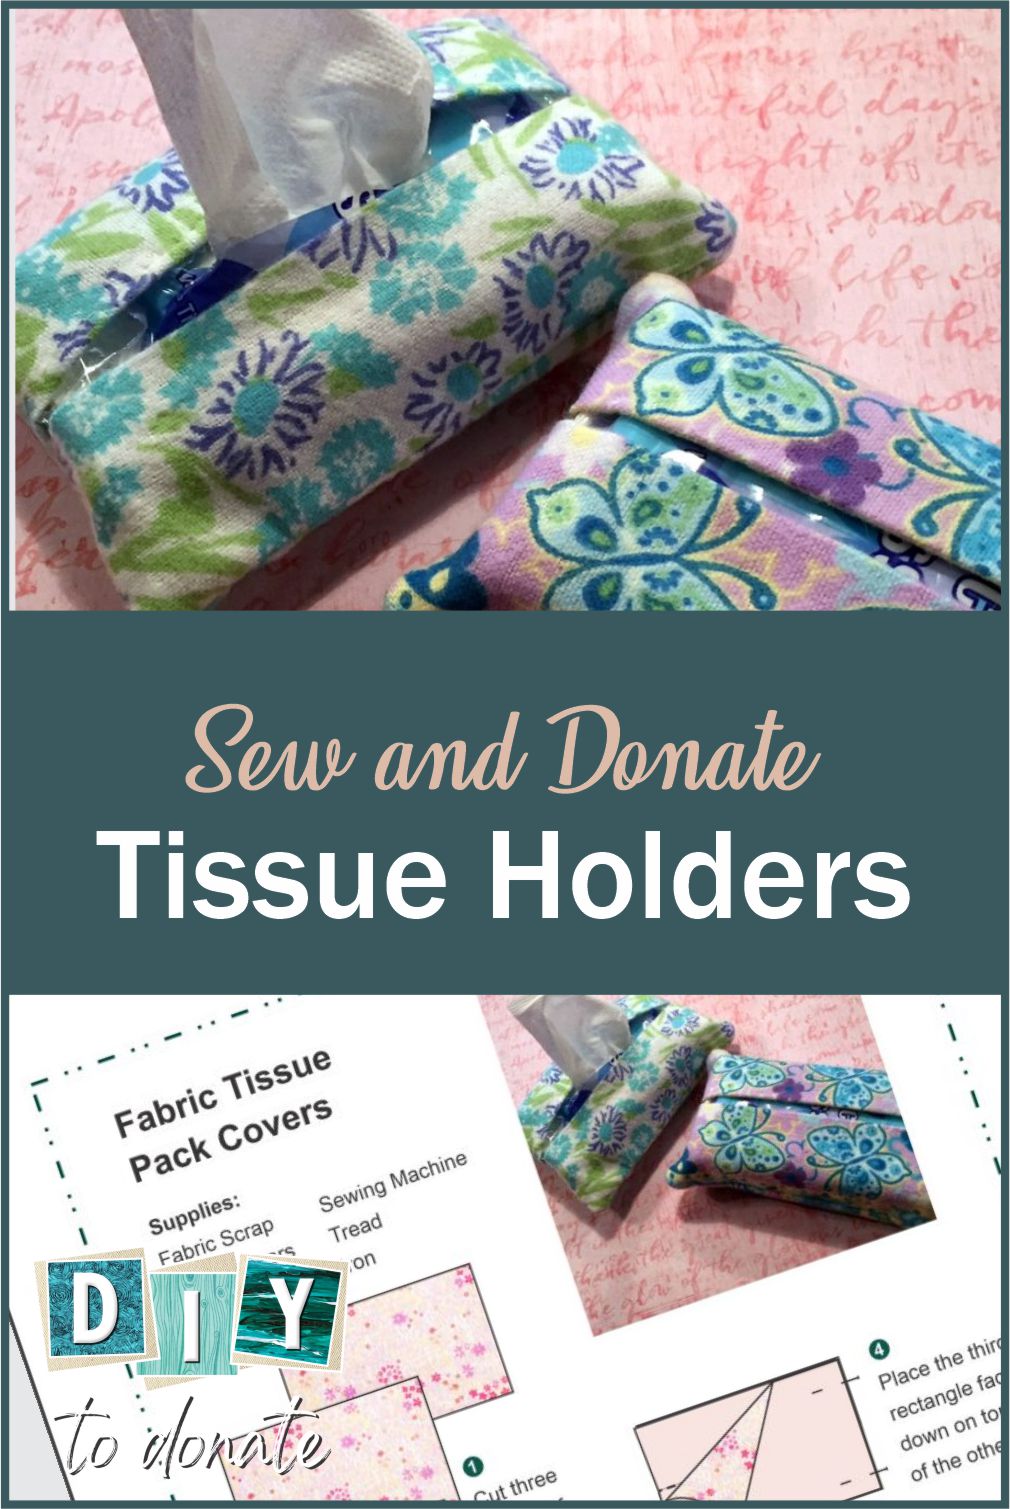 Tissue holders make great items to donate and are easy to make from your fabric scraps. Get our free pdf printable and find out where to donate them. #diytodonate #diy #donate #giveback #tissueholders #donating #printable #helpers